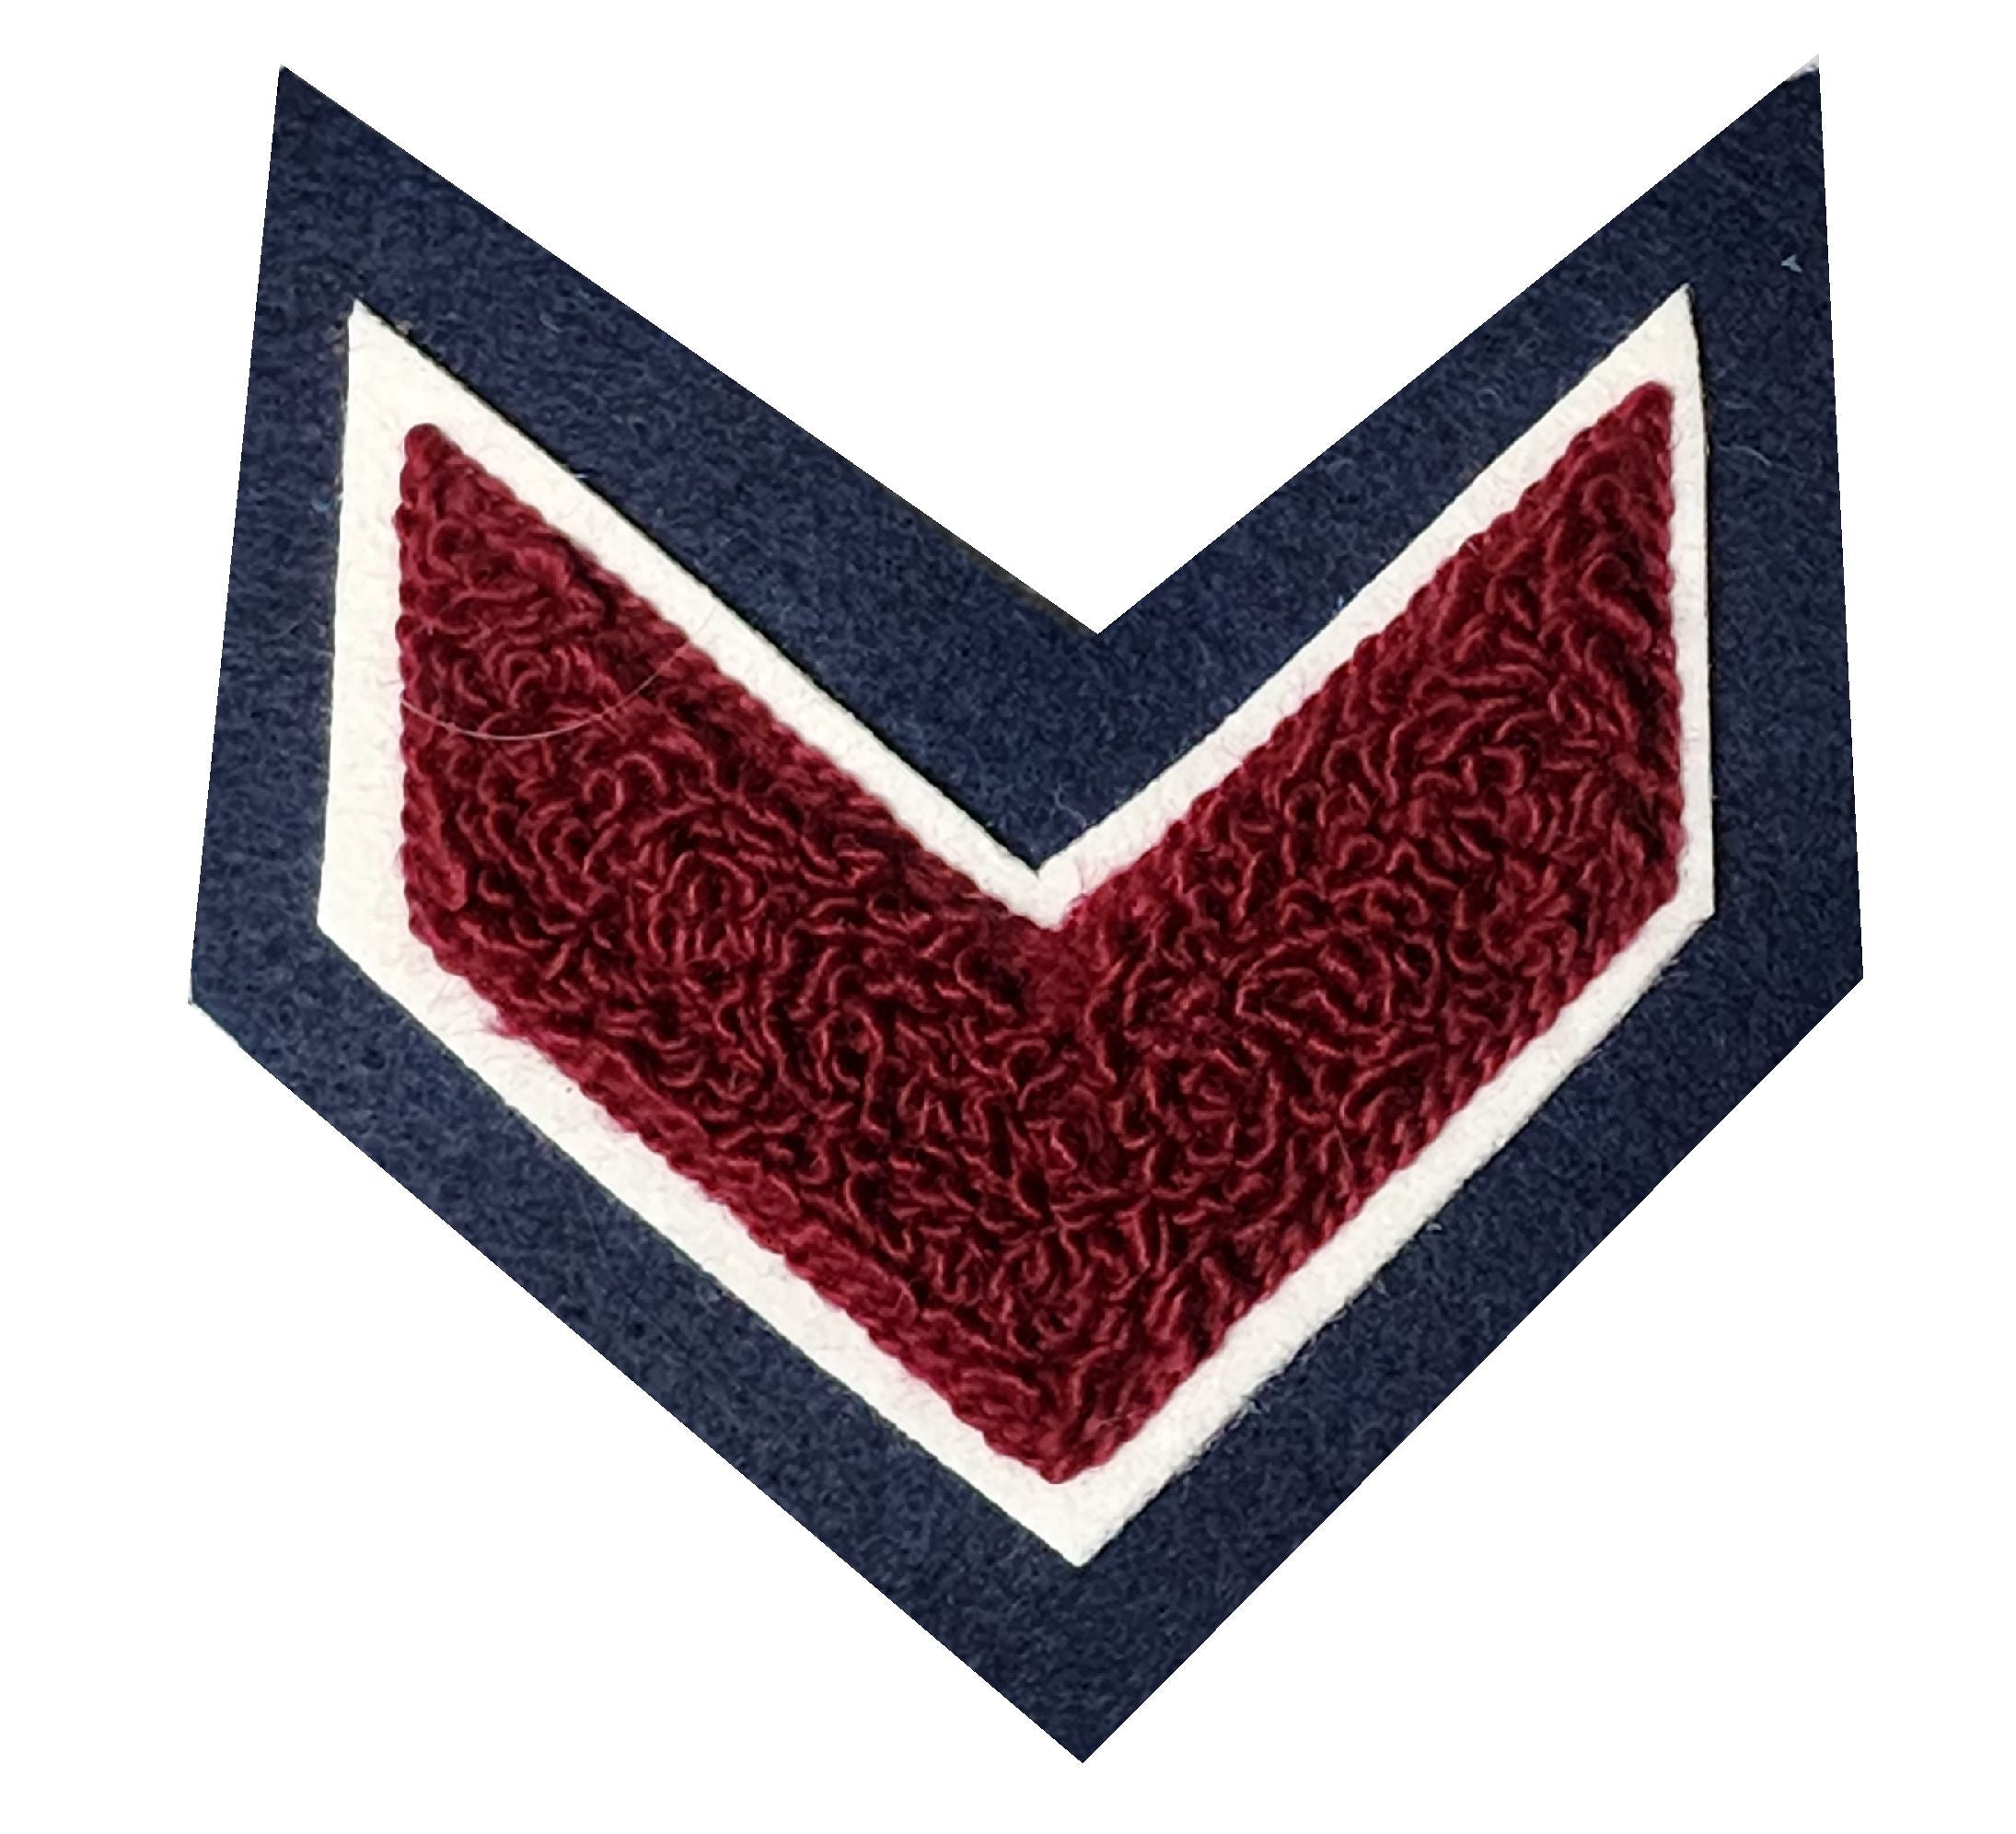 3" Chenille chevron patch for letter jackets and sweaters